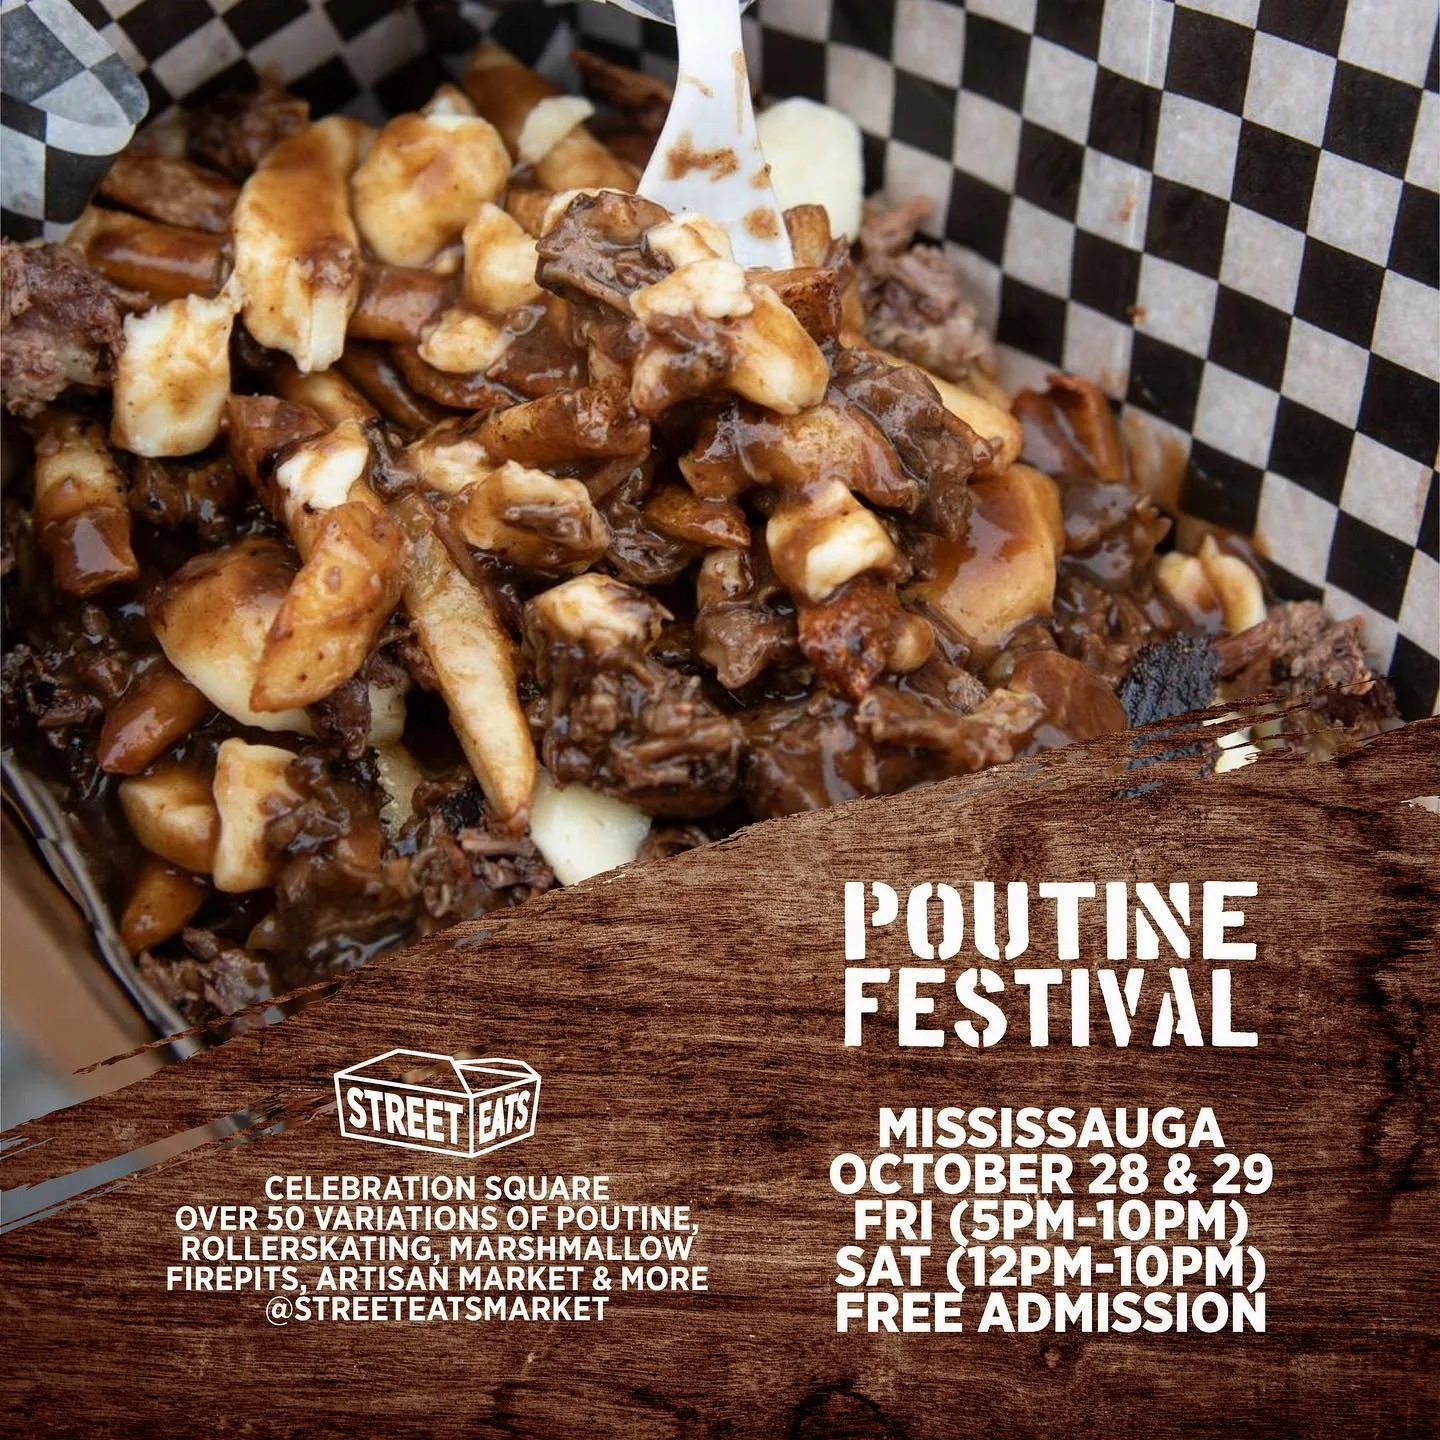 Mississauga is getting a massive poutine festival